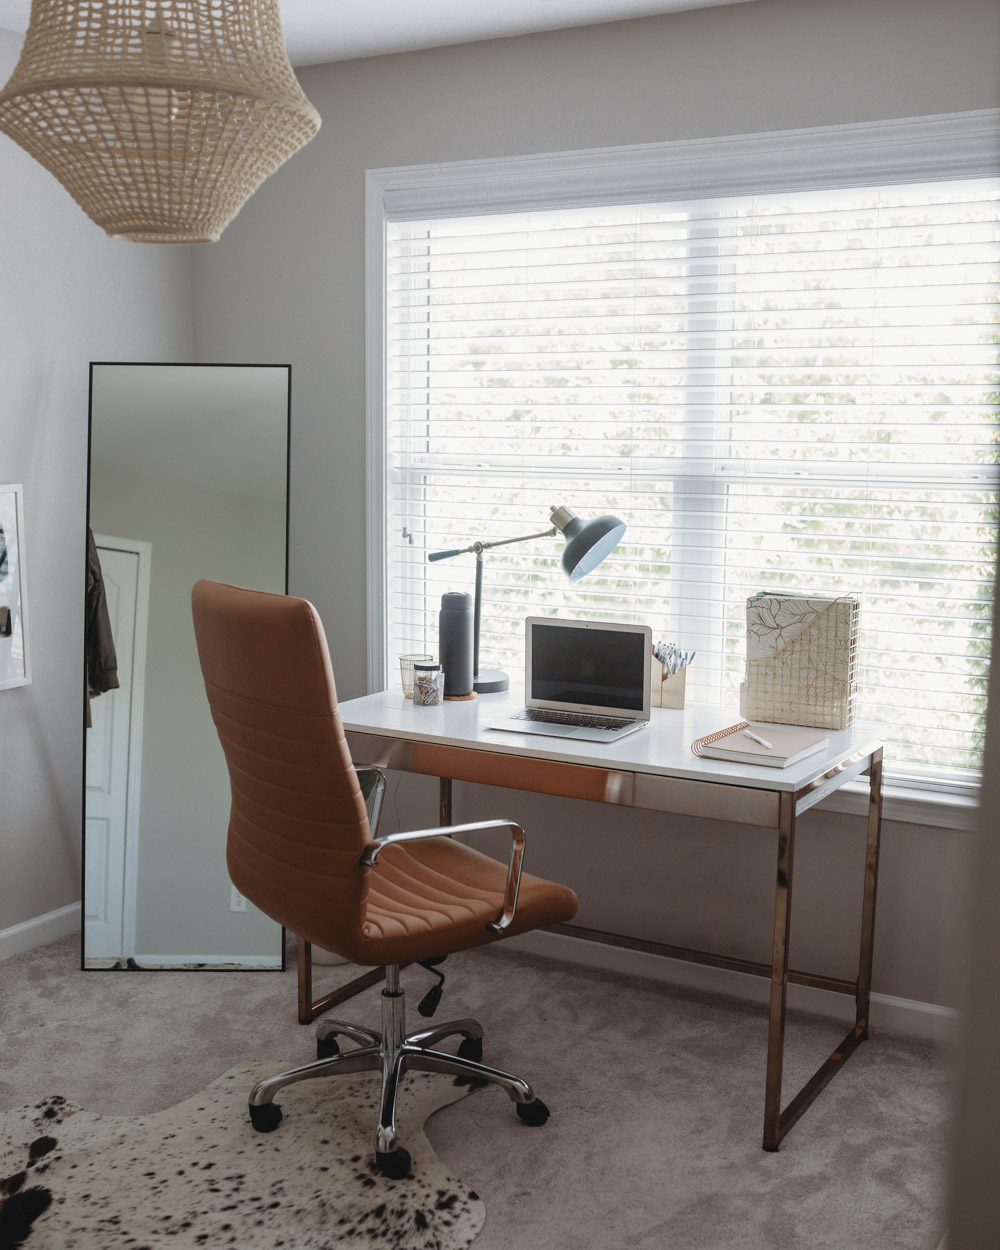 A window with a modern desk and tan leather chair in front of it.